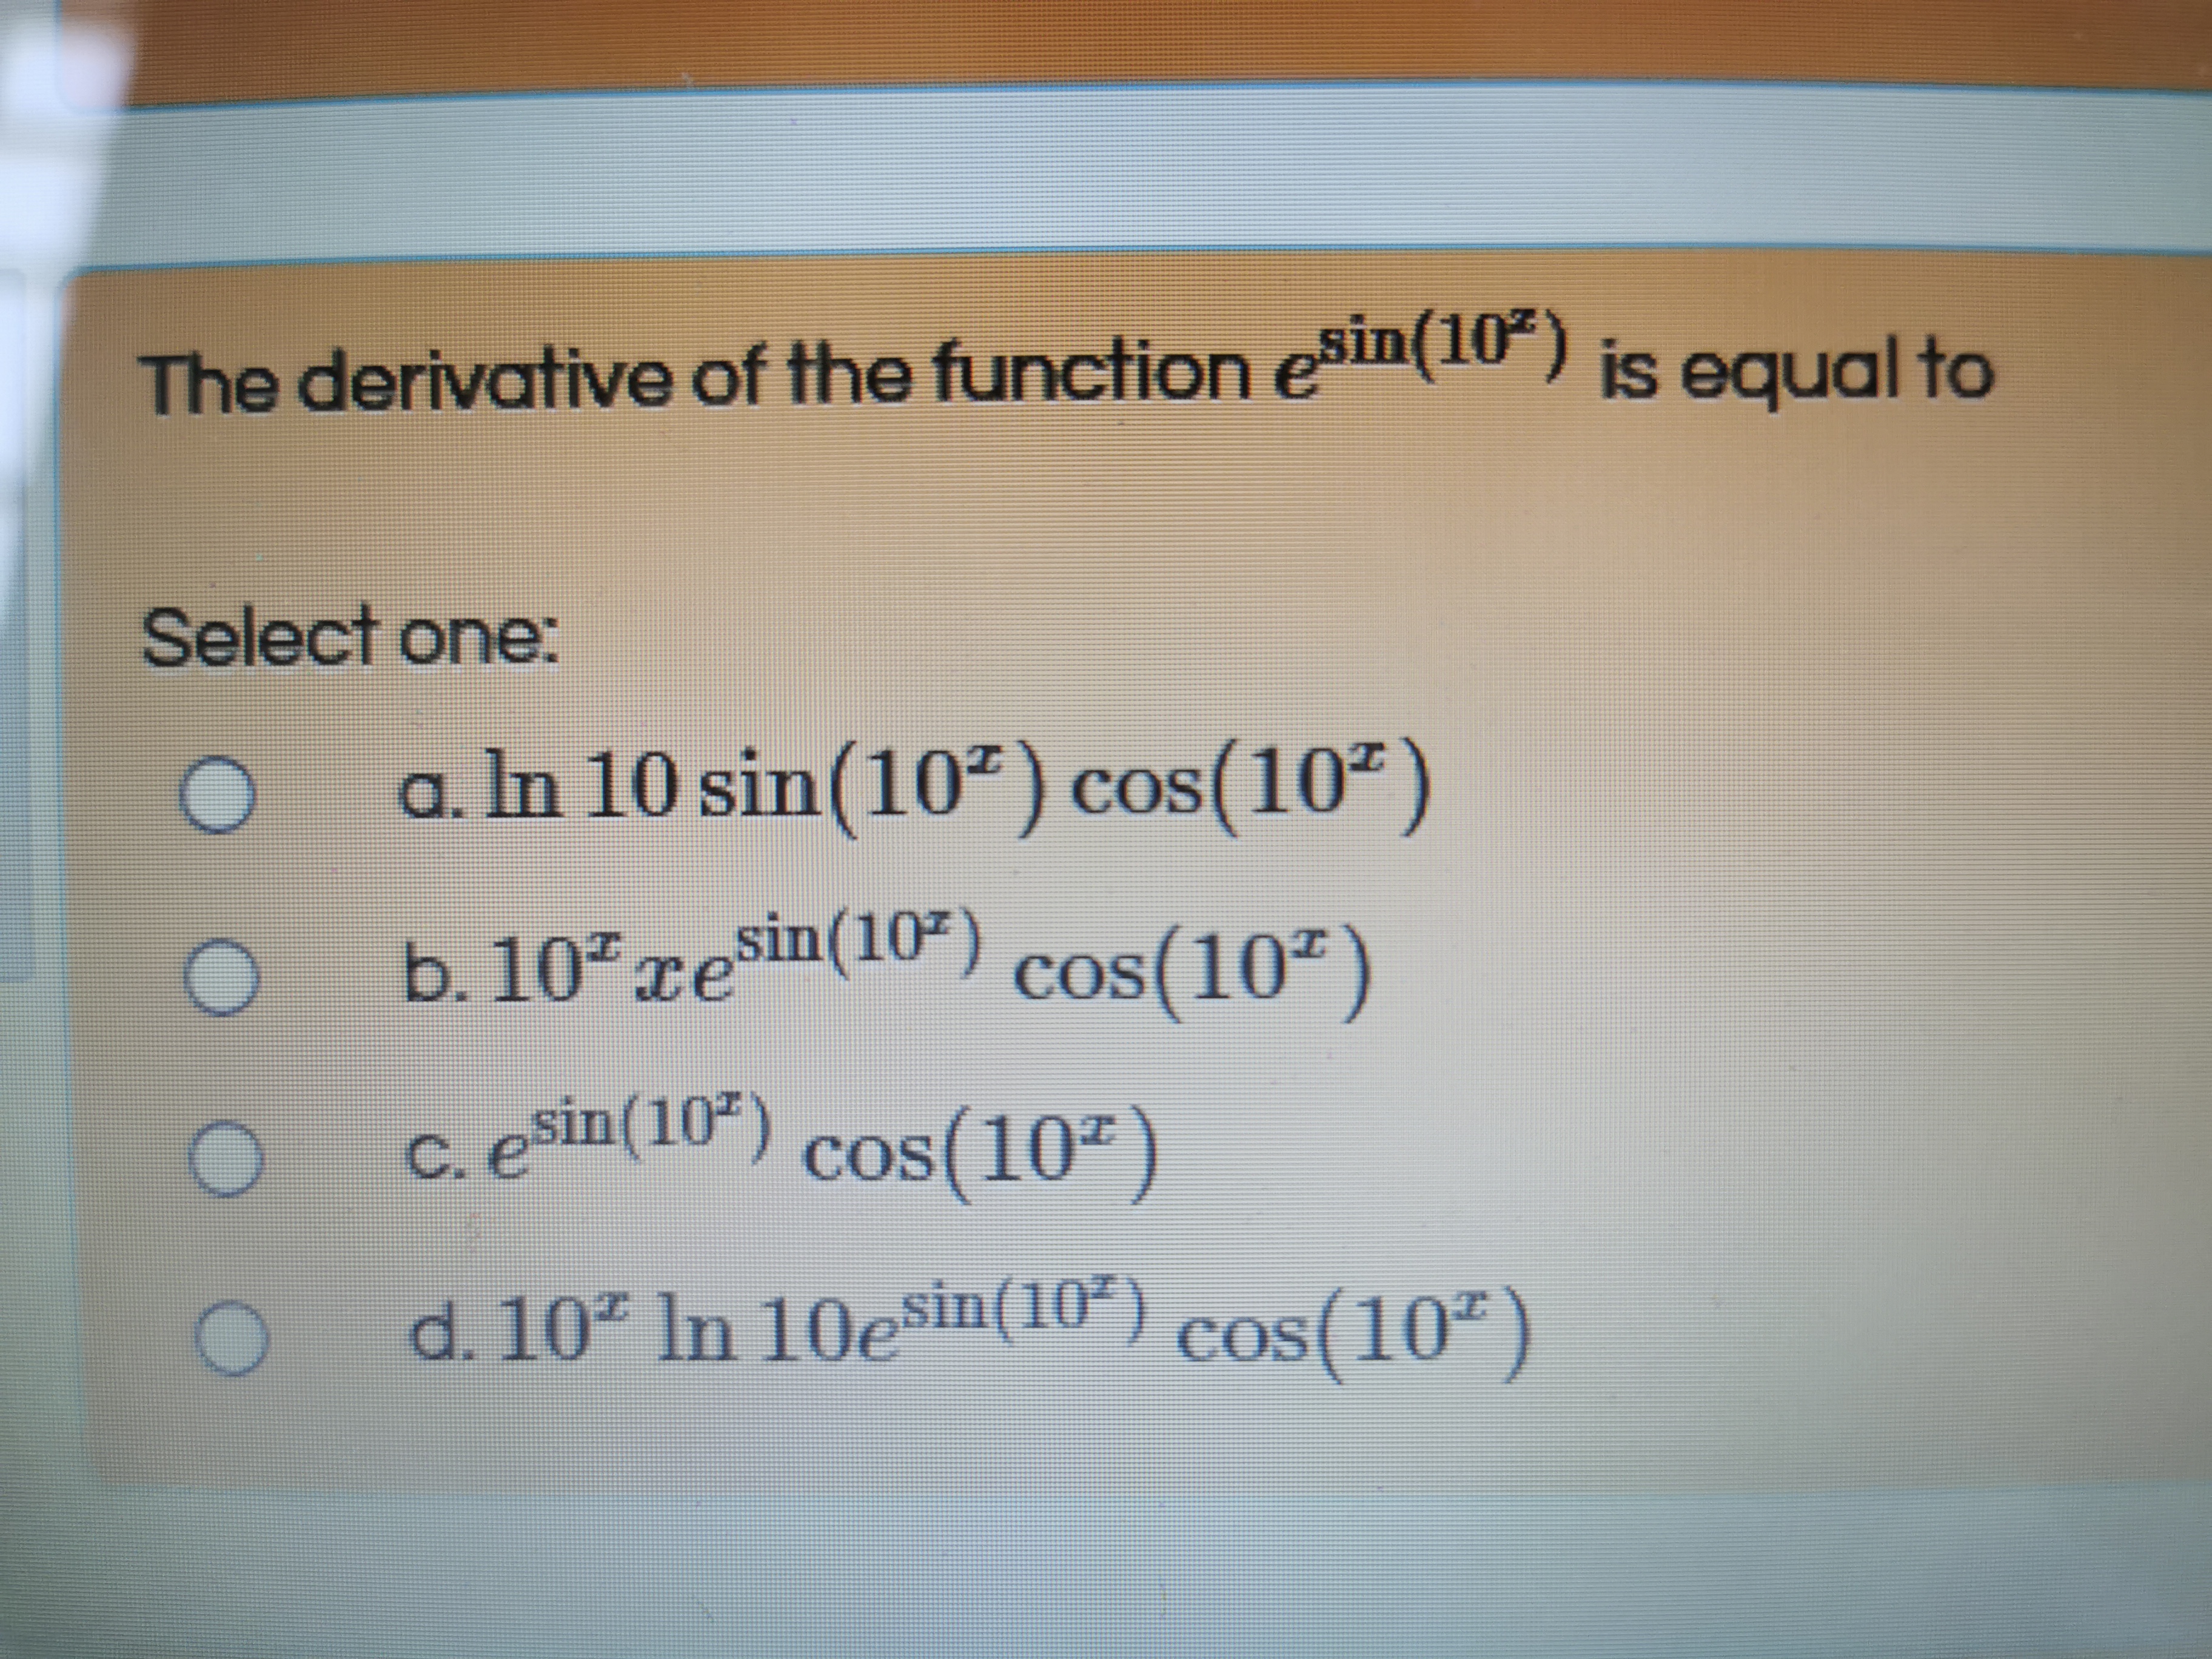 The derivative of the function esin(10) is equal to
